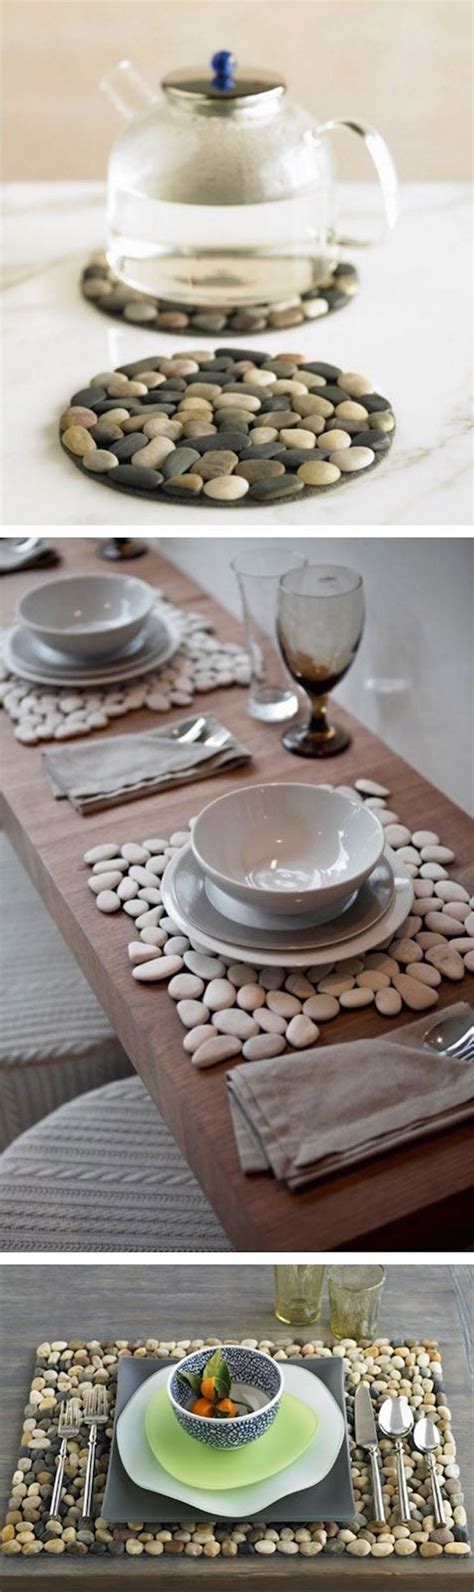 Diy Home Decor Ideas With Pebbles And River Rocks